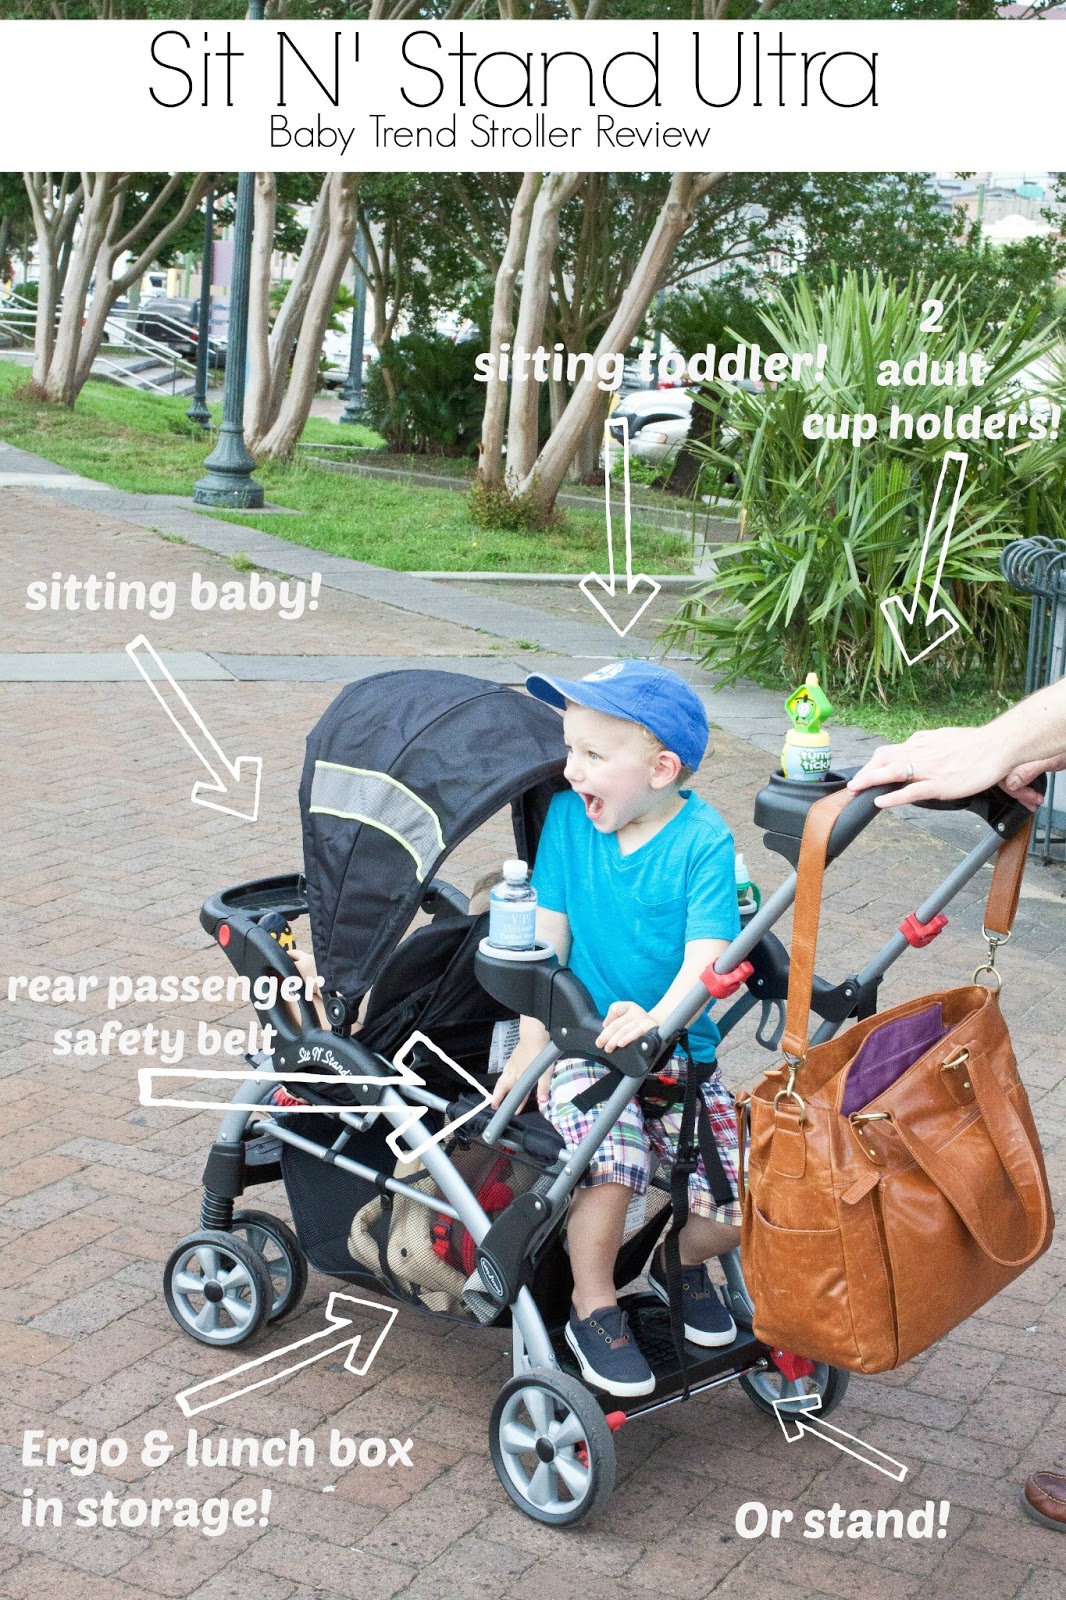 baby trend sit and stand stroller reviews